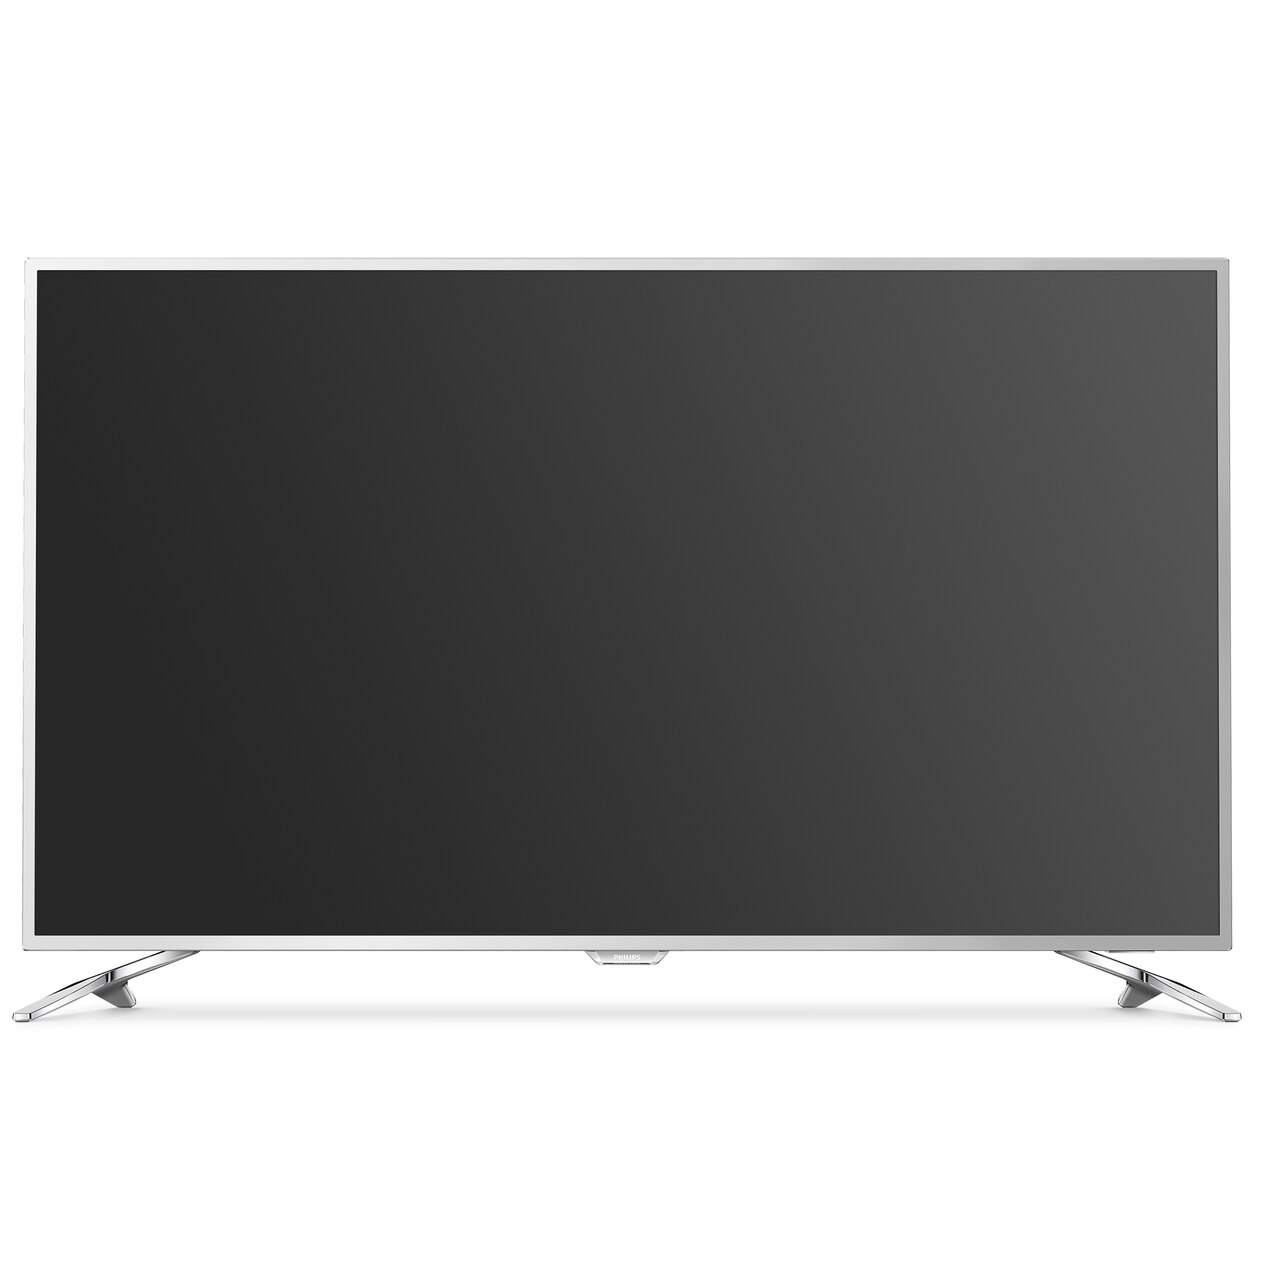 frequency alias present day Televizor LED Smart Android Philips, 139 cm, 55PUS6501/12, 4K Ultra HD,  Clasa A - eMAG.ro